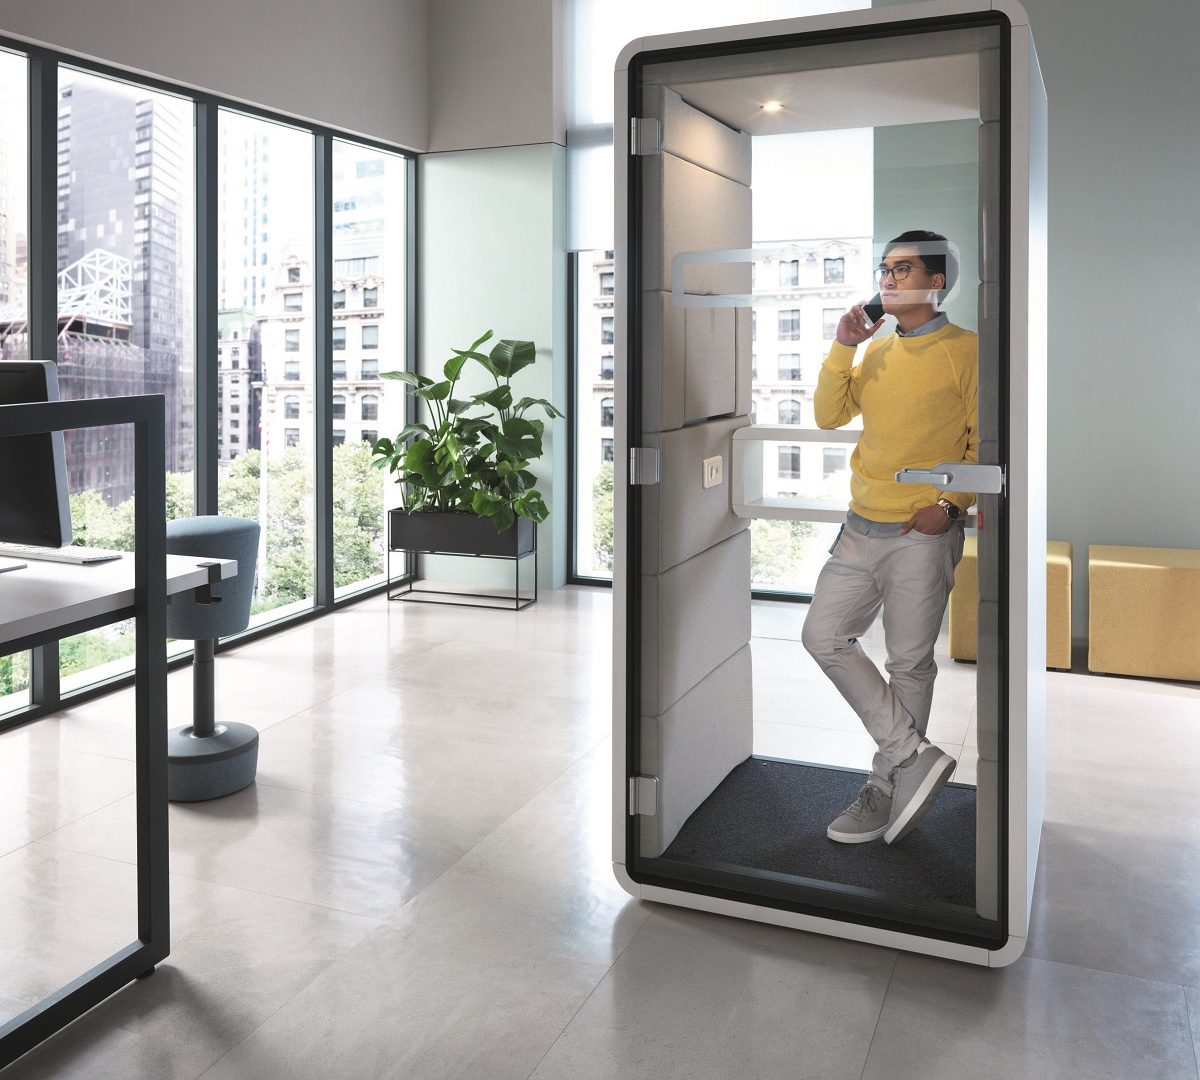 Office pods, the ultimate amenity to land tenants in a hybrid world